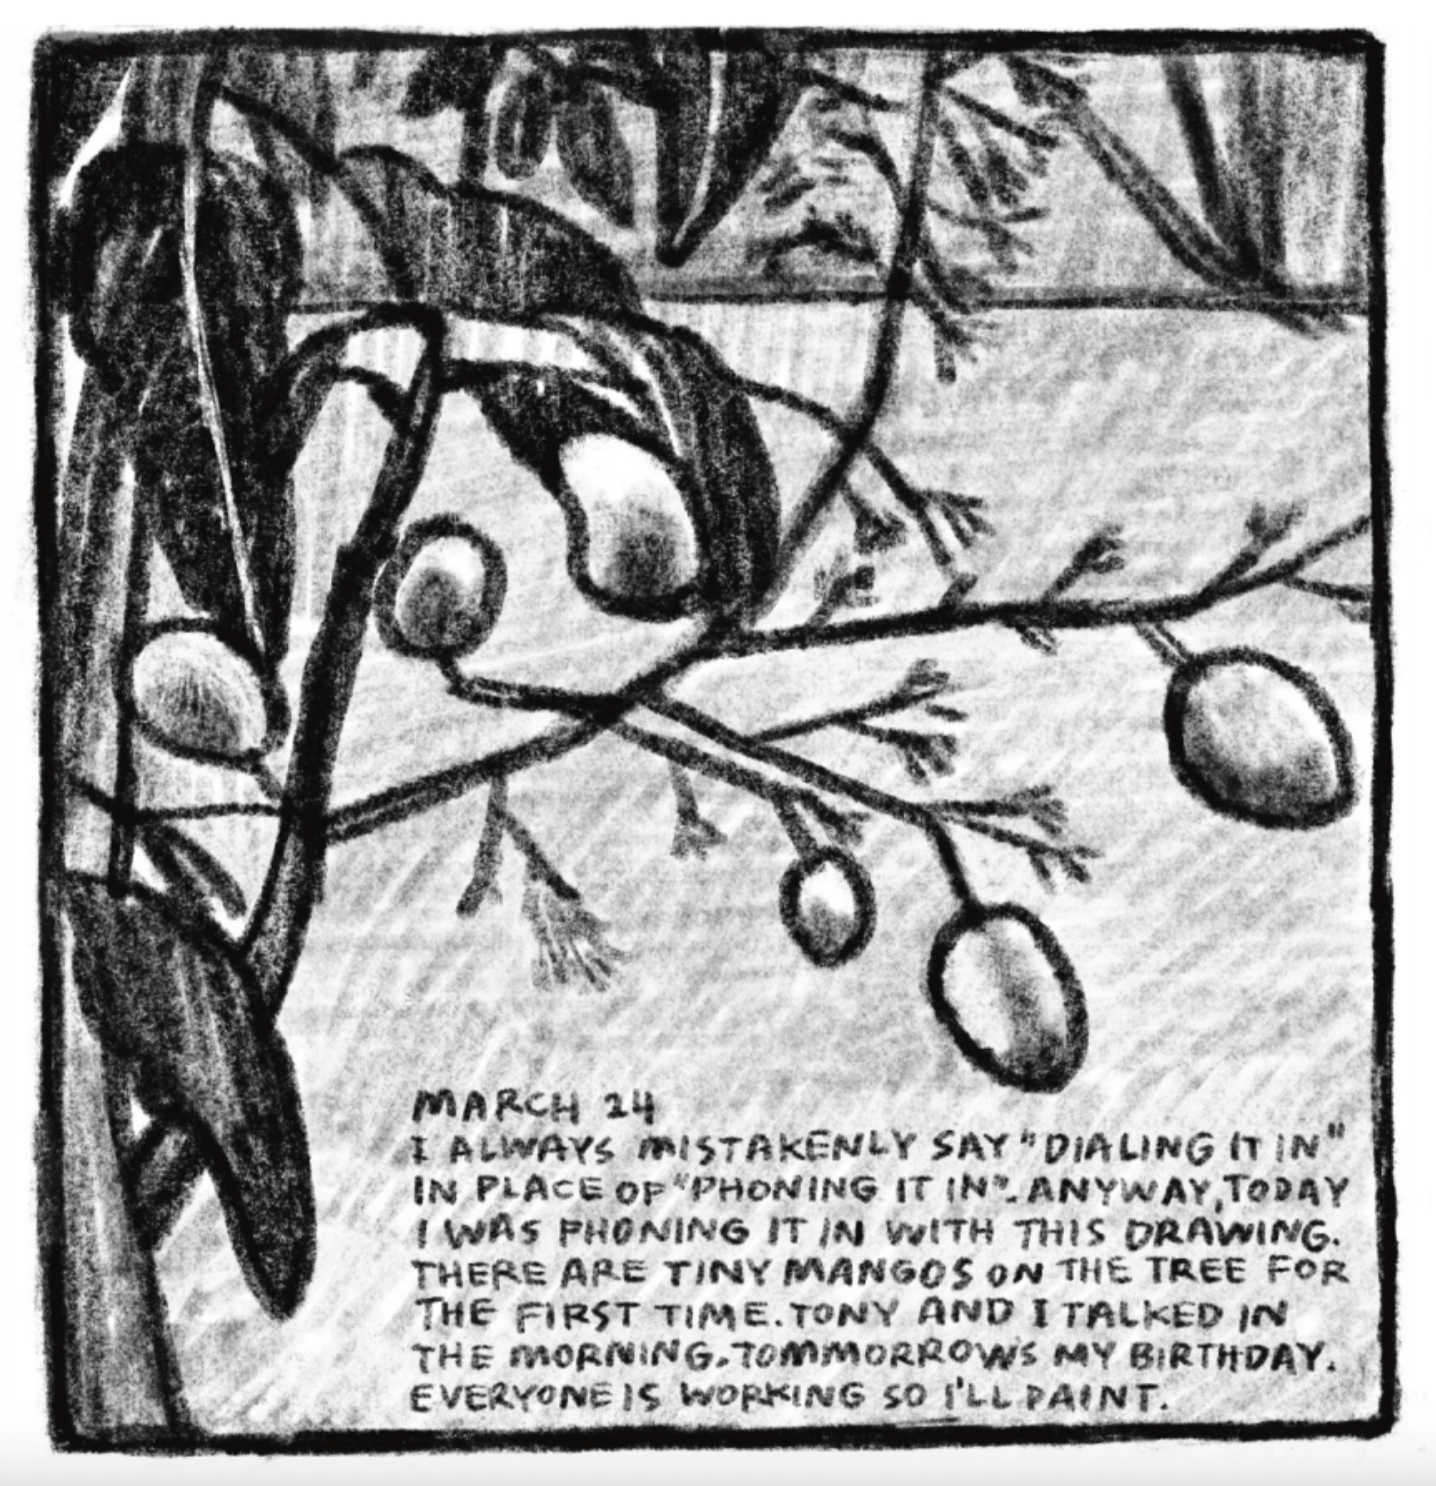 Close up drawing of a mango tree bearing fruit. 

Description reads: "March 24. I always mistakenly say 'dialing it in' in place of 'phoning it in.' Anyway, today I was phoning it in with this drawing. There are tiny mangos on the tree for the first time. Tony and I talked in the morning. Tomorrow's my birthday. Everyone is working so I'll paint."